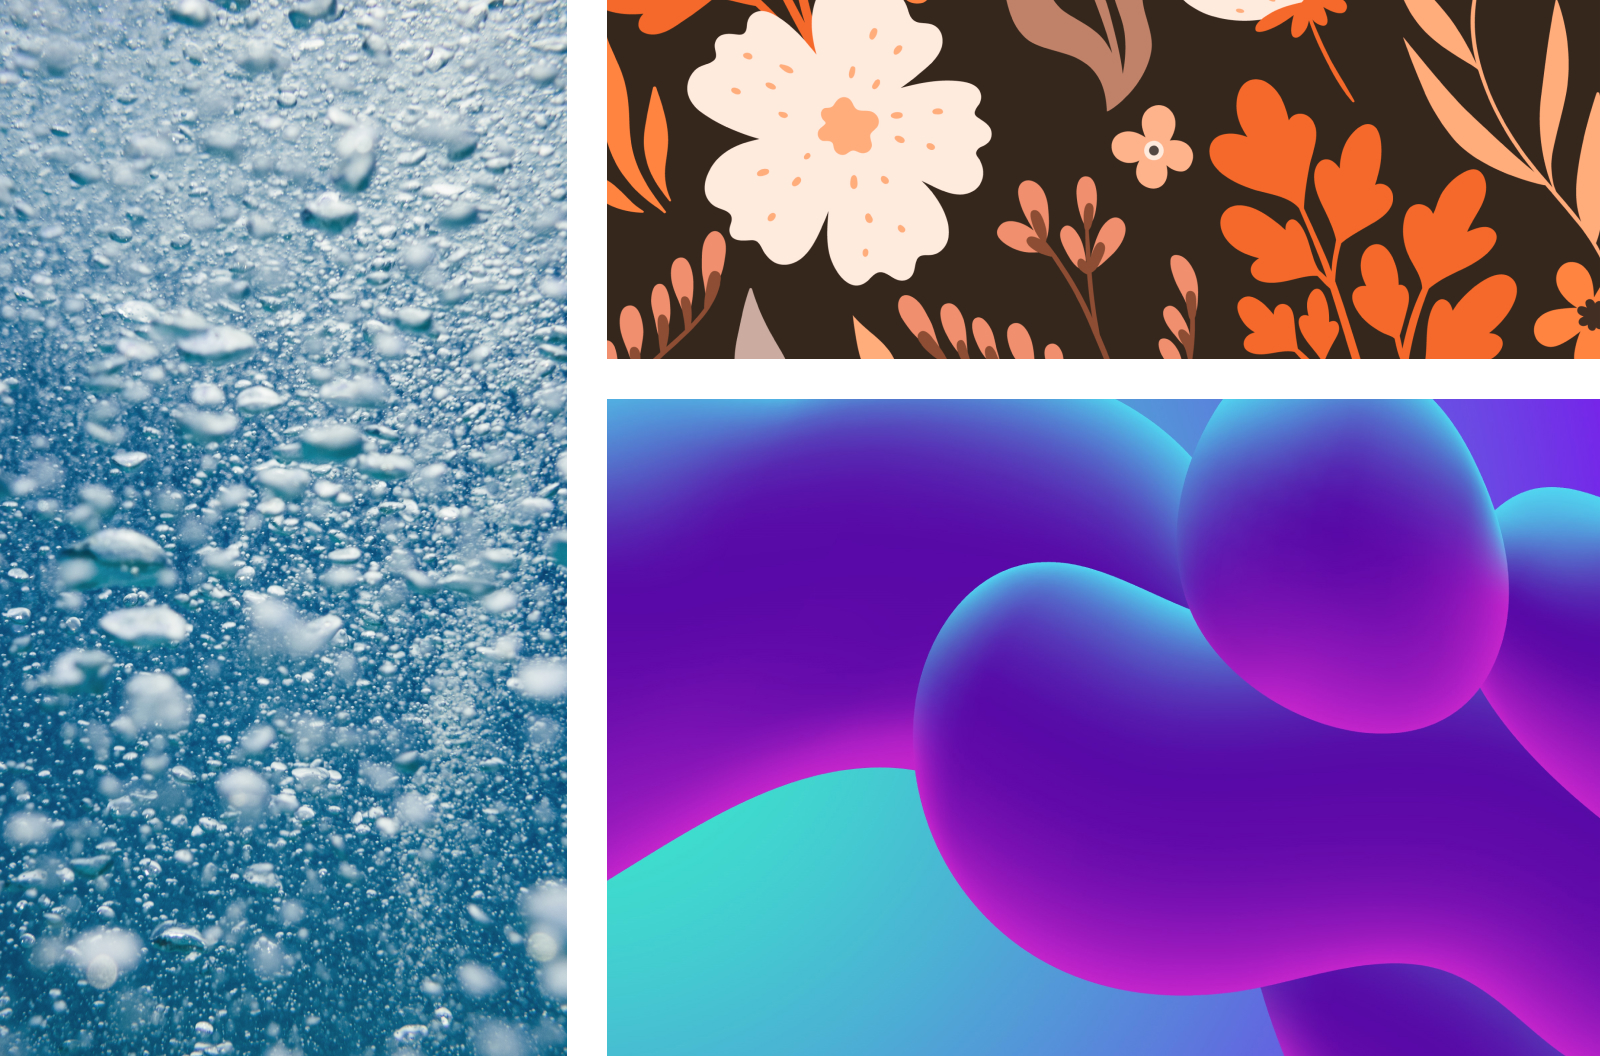 A gallery of abstract images and illustrations. One is bubbly water, another is an illustration of different flowers, and the other is an abstract, fluid illustration.